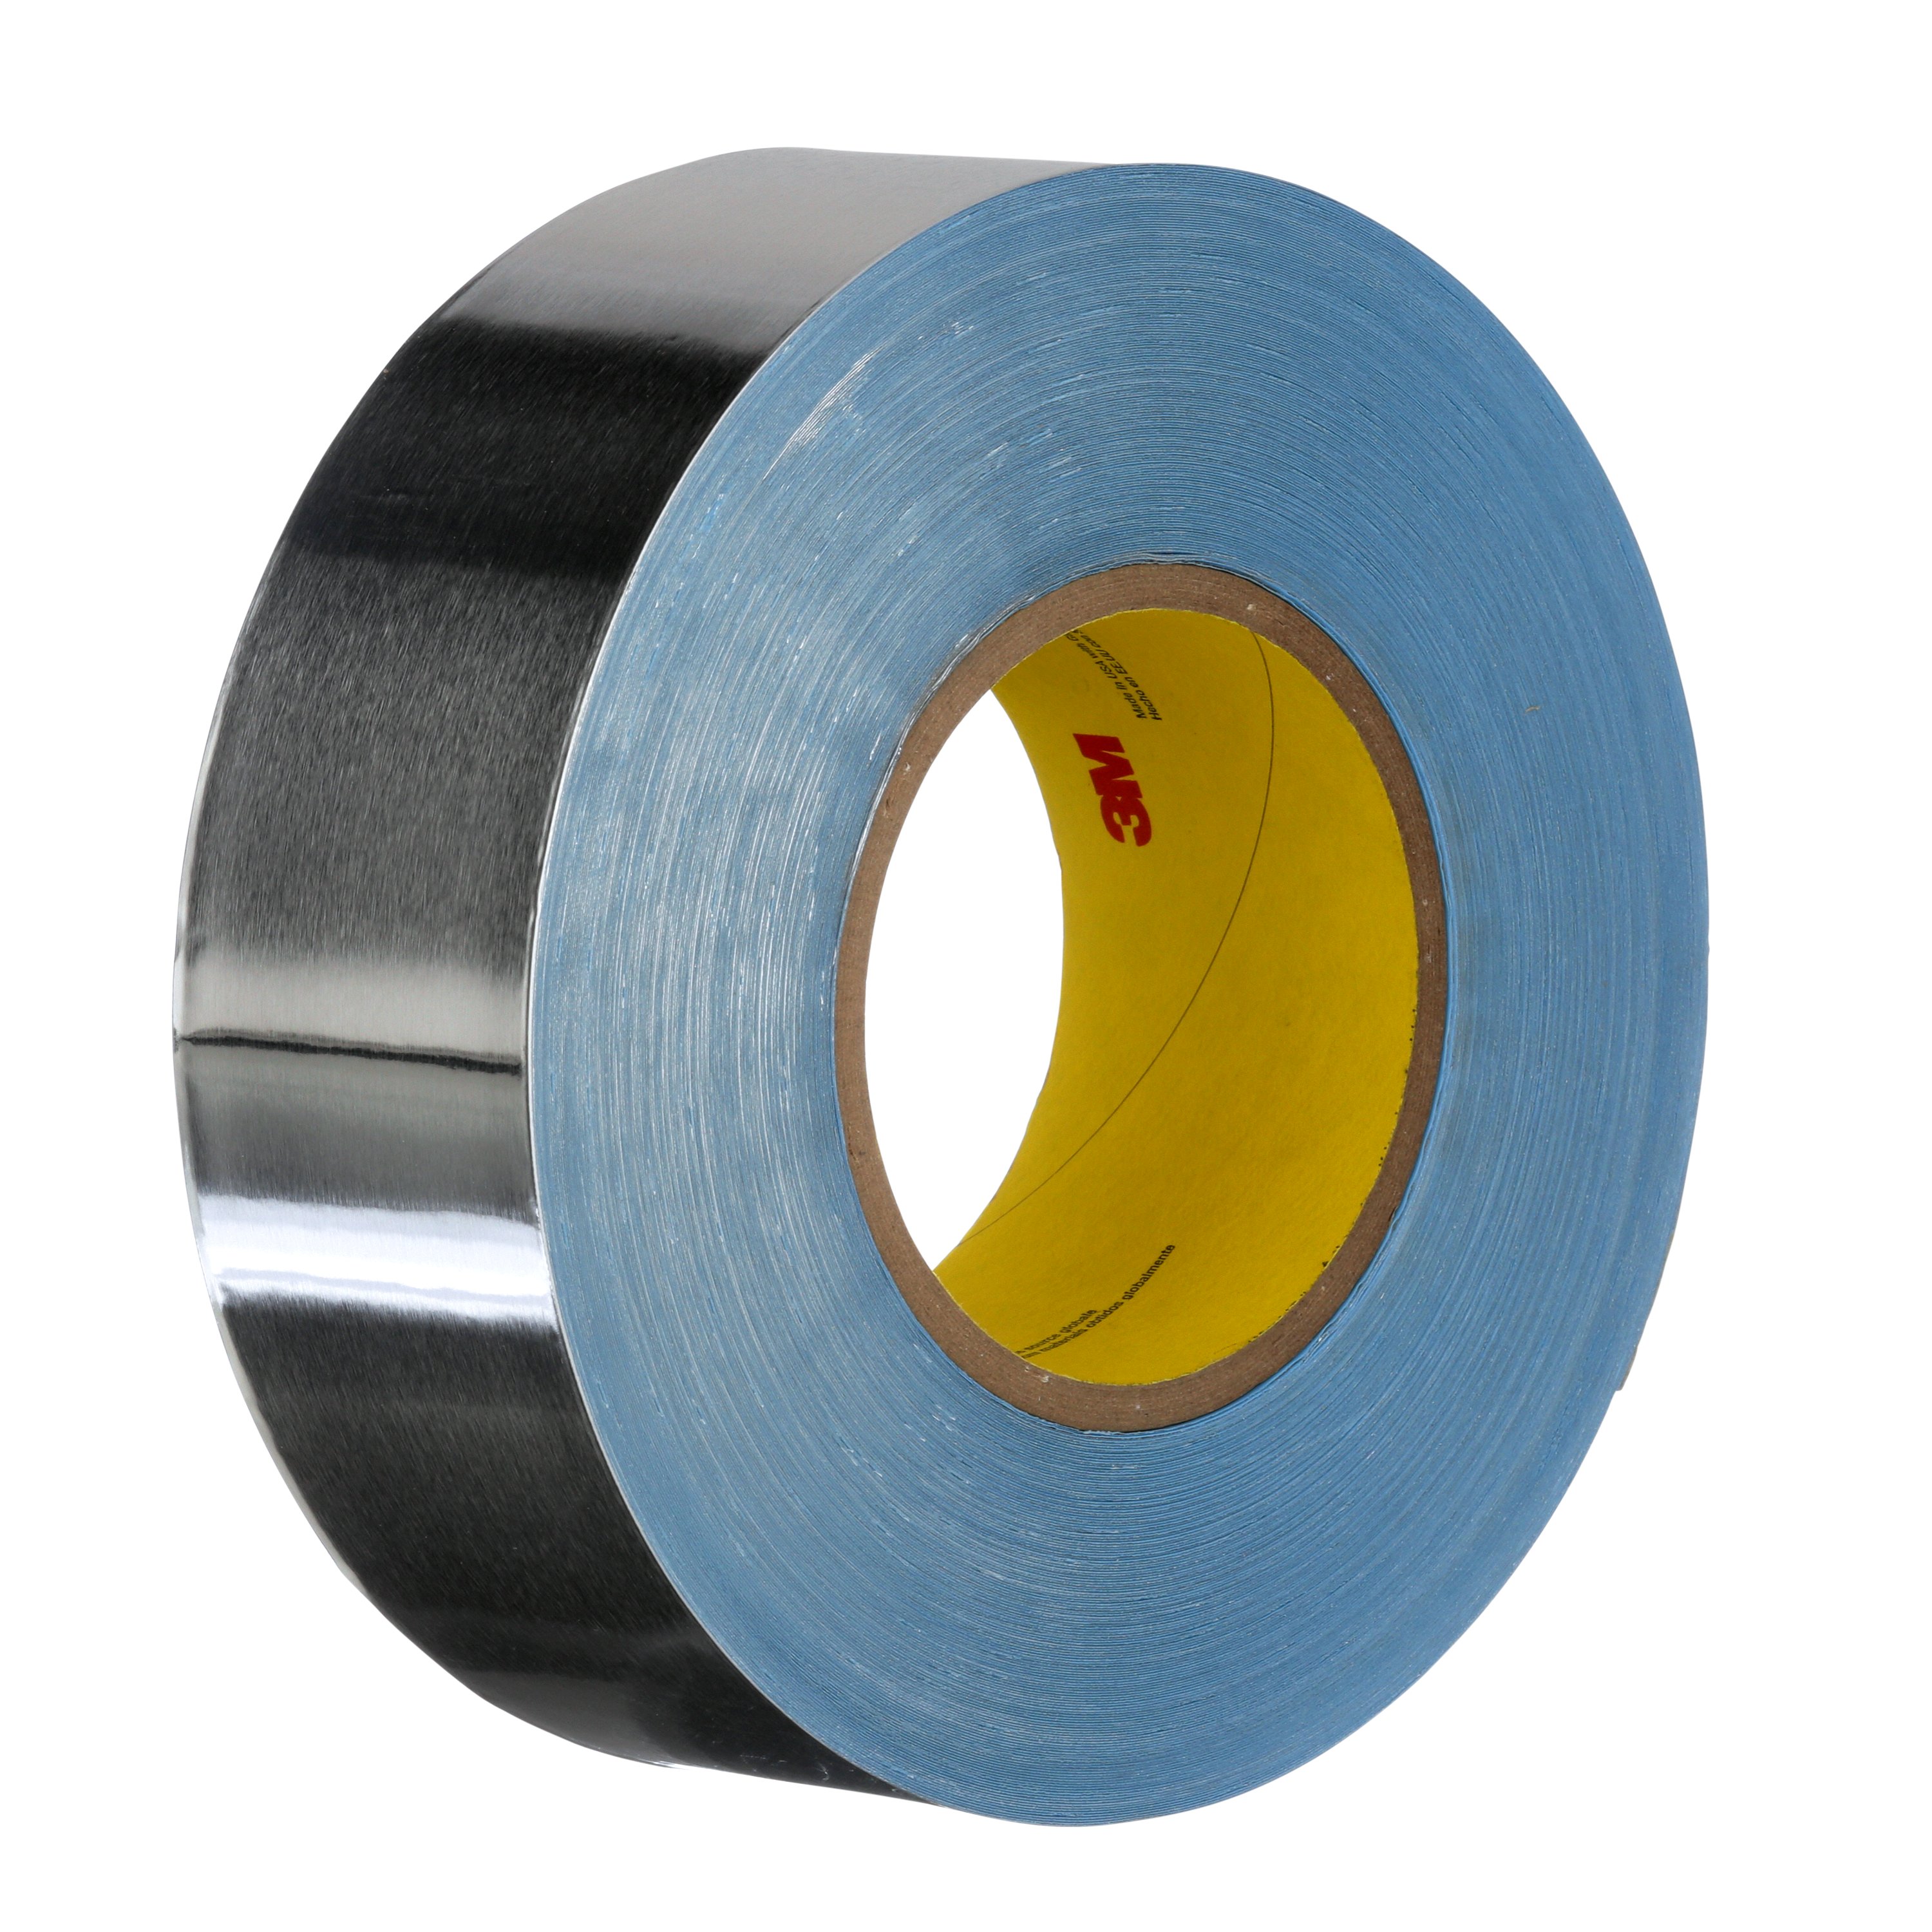 3M™ Vibration Damping Tape 434, Silver, in x 60 yd, 7.5 mil, roll per  case 7010374435 Ward-Kennedy